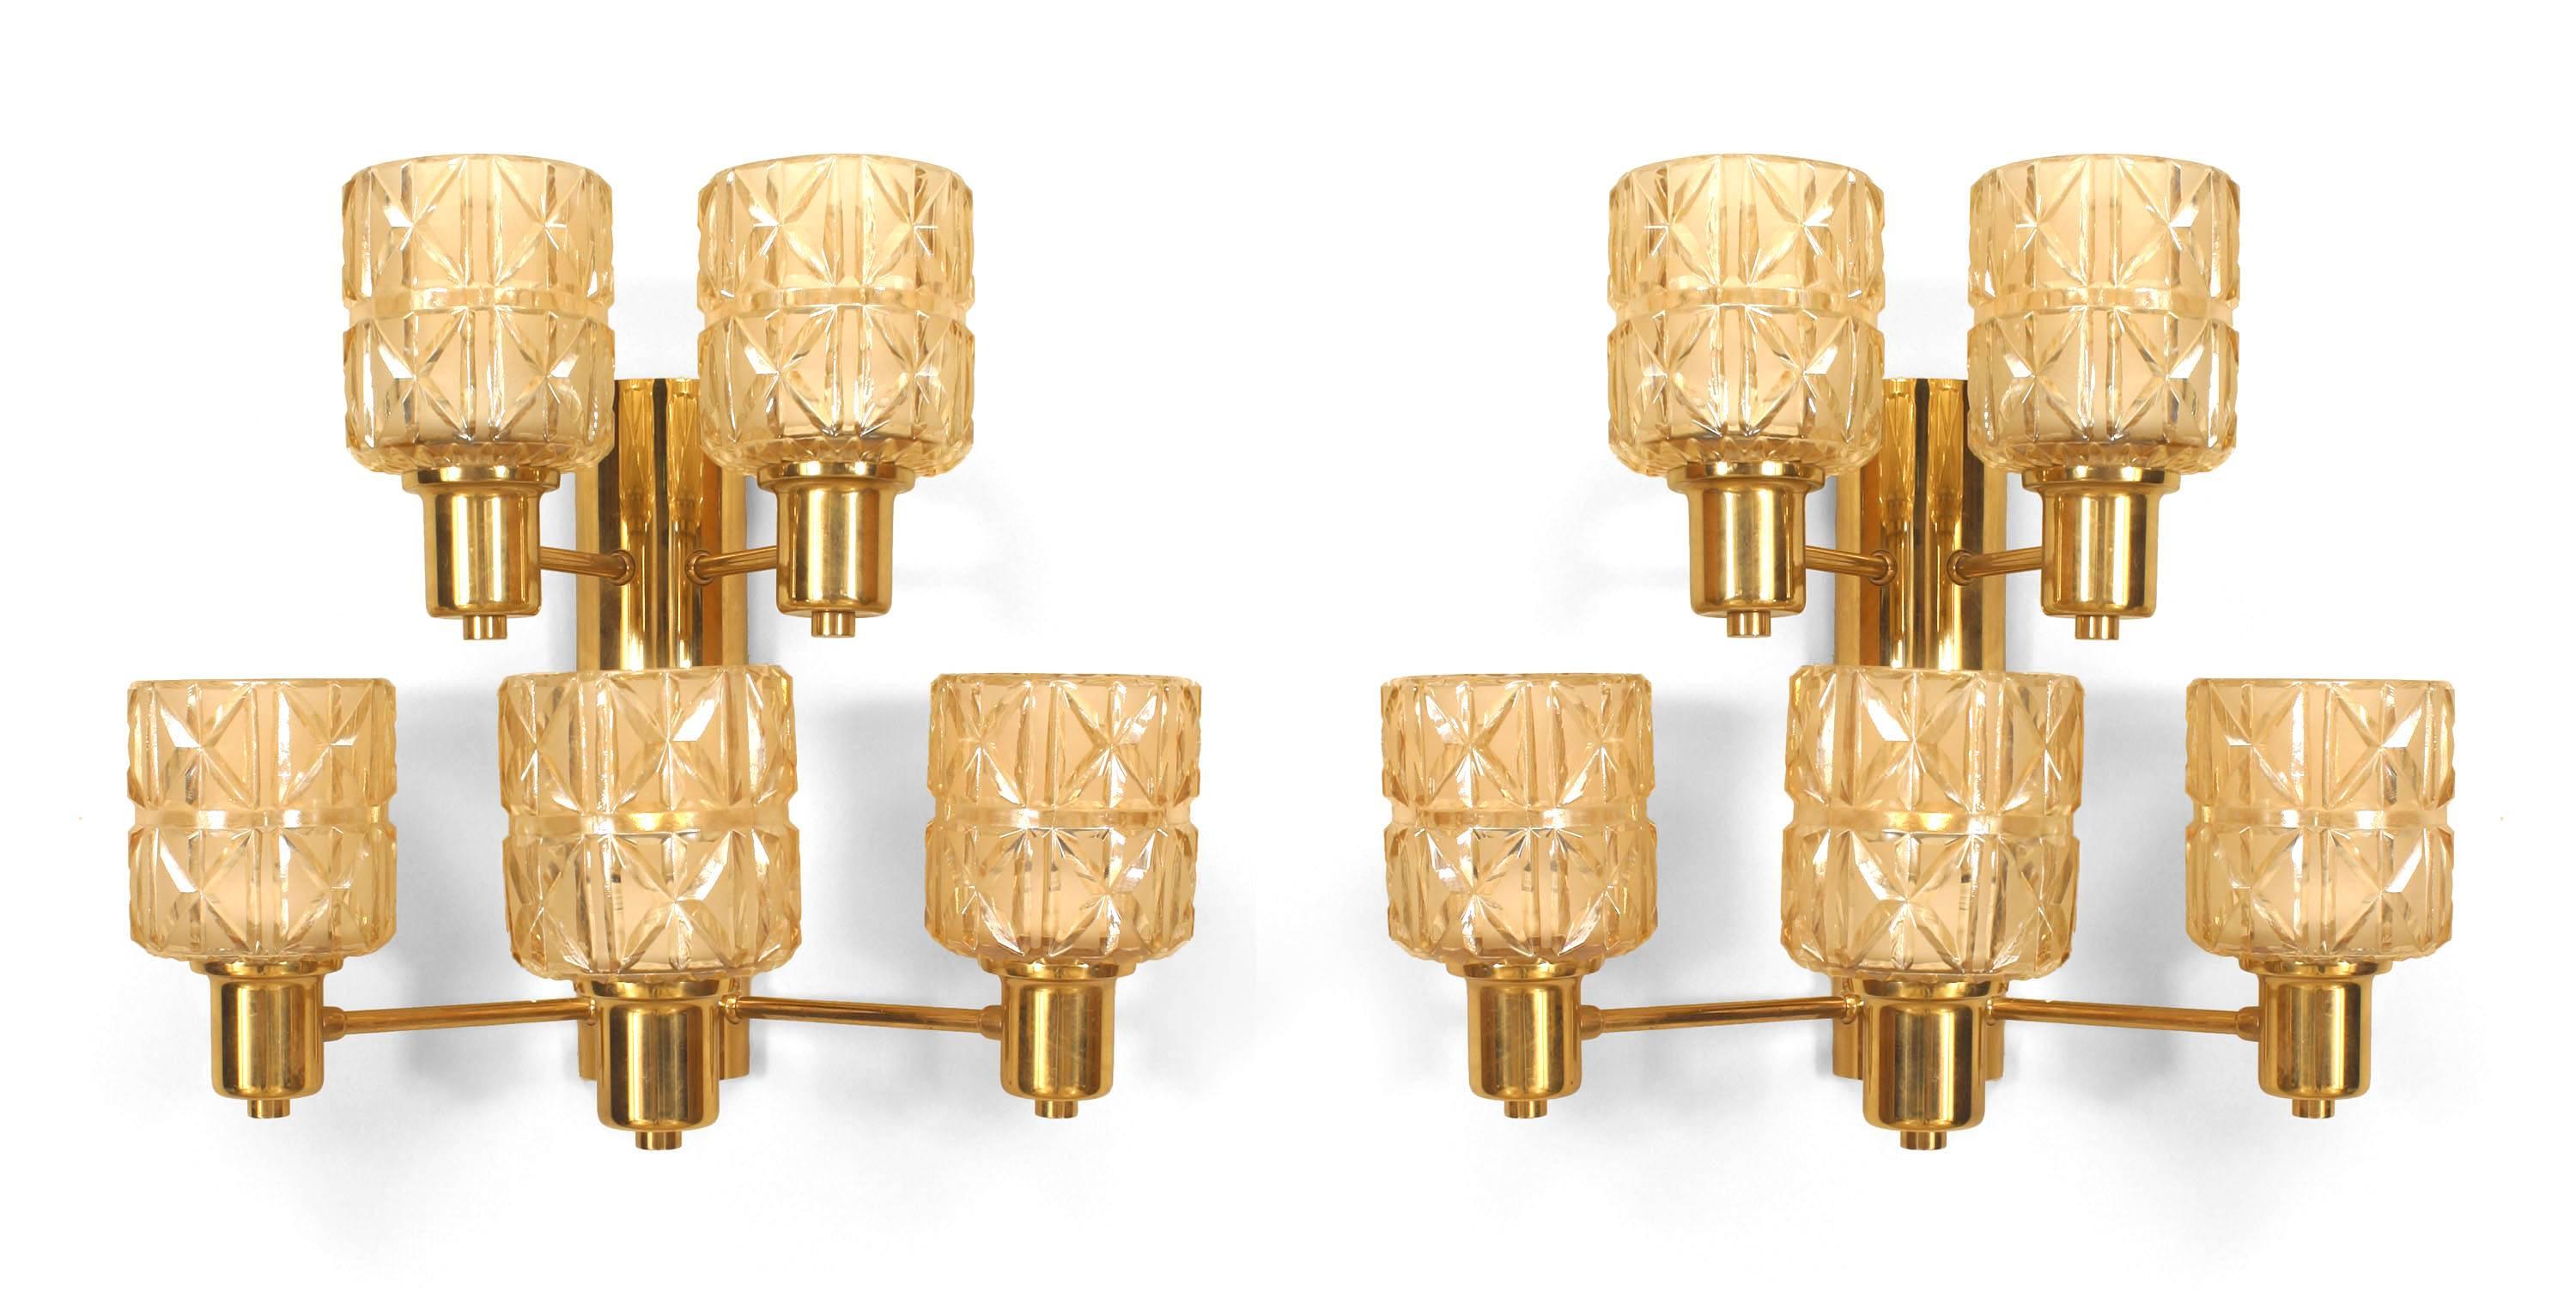 Pair of Swedish Mid-Century (1950s) wall sconces with a two-tier brass frame supporting two cut glass shades on the upper tier and three shades on the lower (attributed to HANS AGNE JAKOBSEN)
